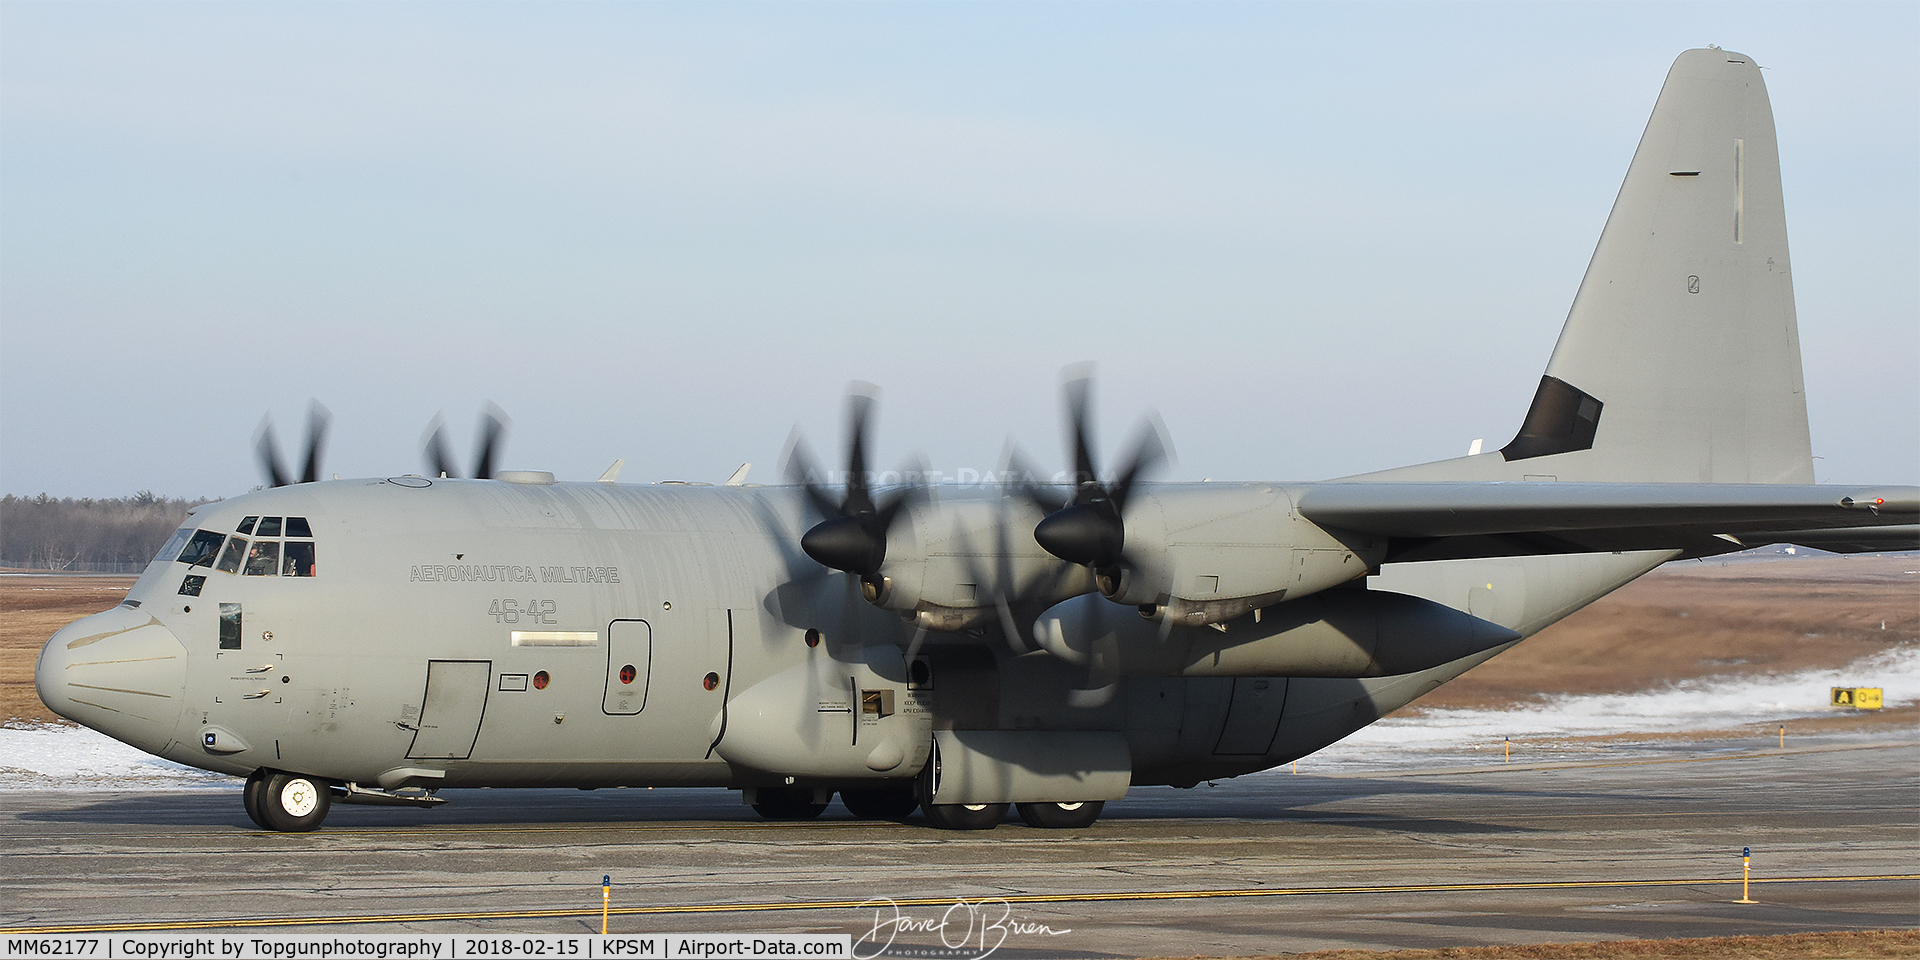 MM62177, Lockheed Martin C-130J-30 Super Hercules C/N 382-5498, C-130 on its way to Nellis for Red Flag 18-1